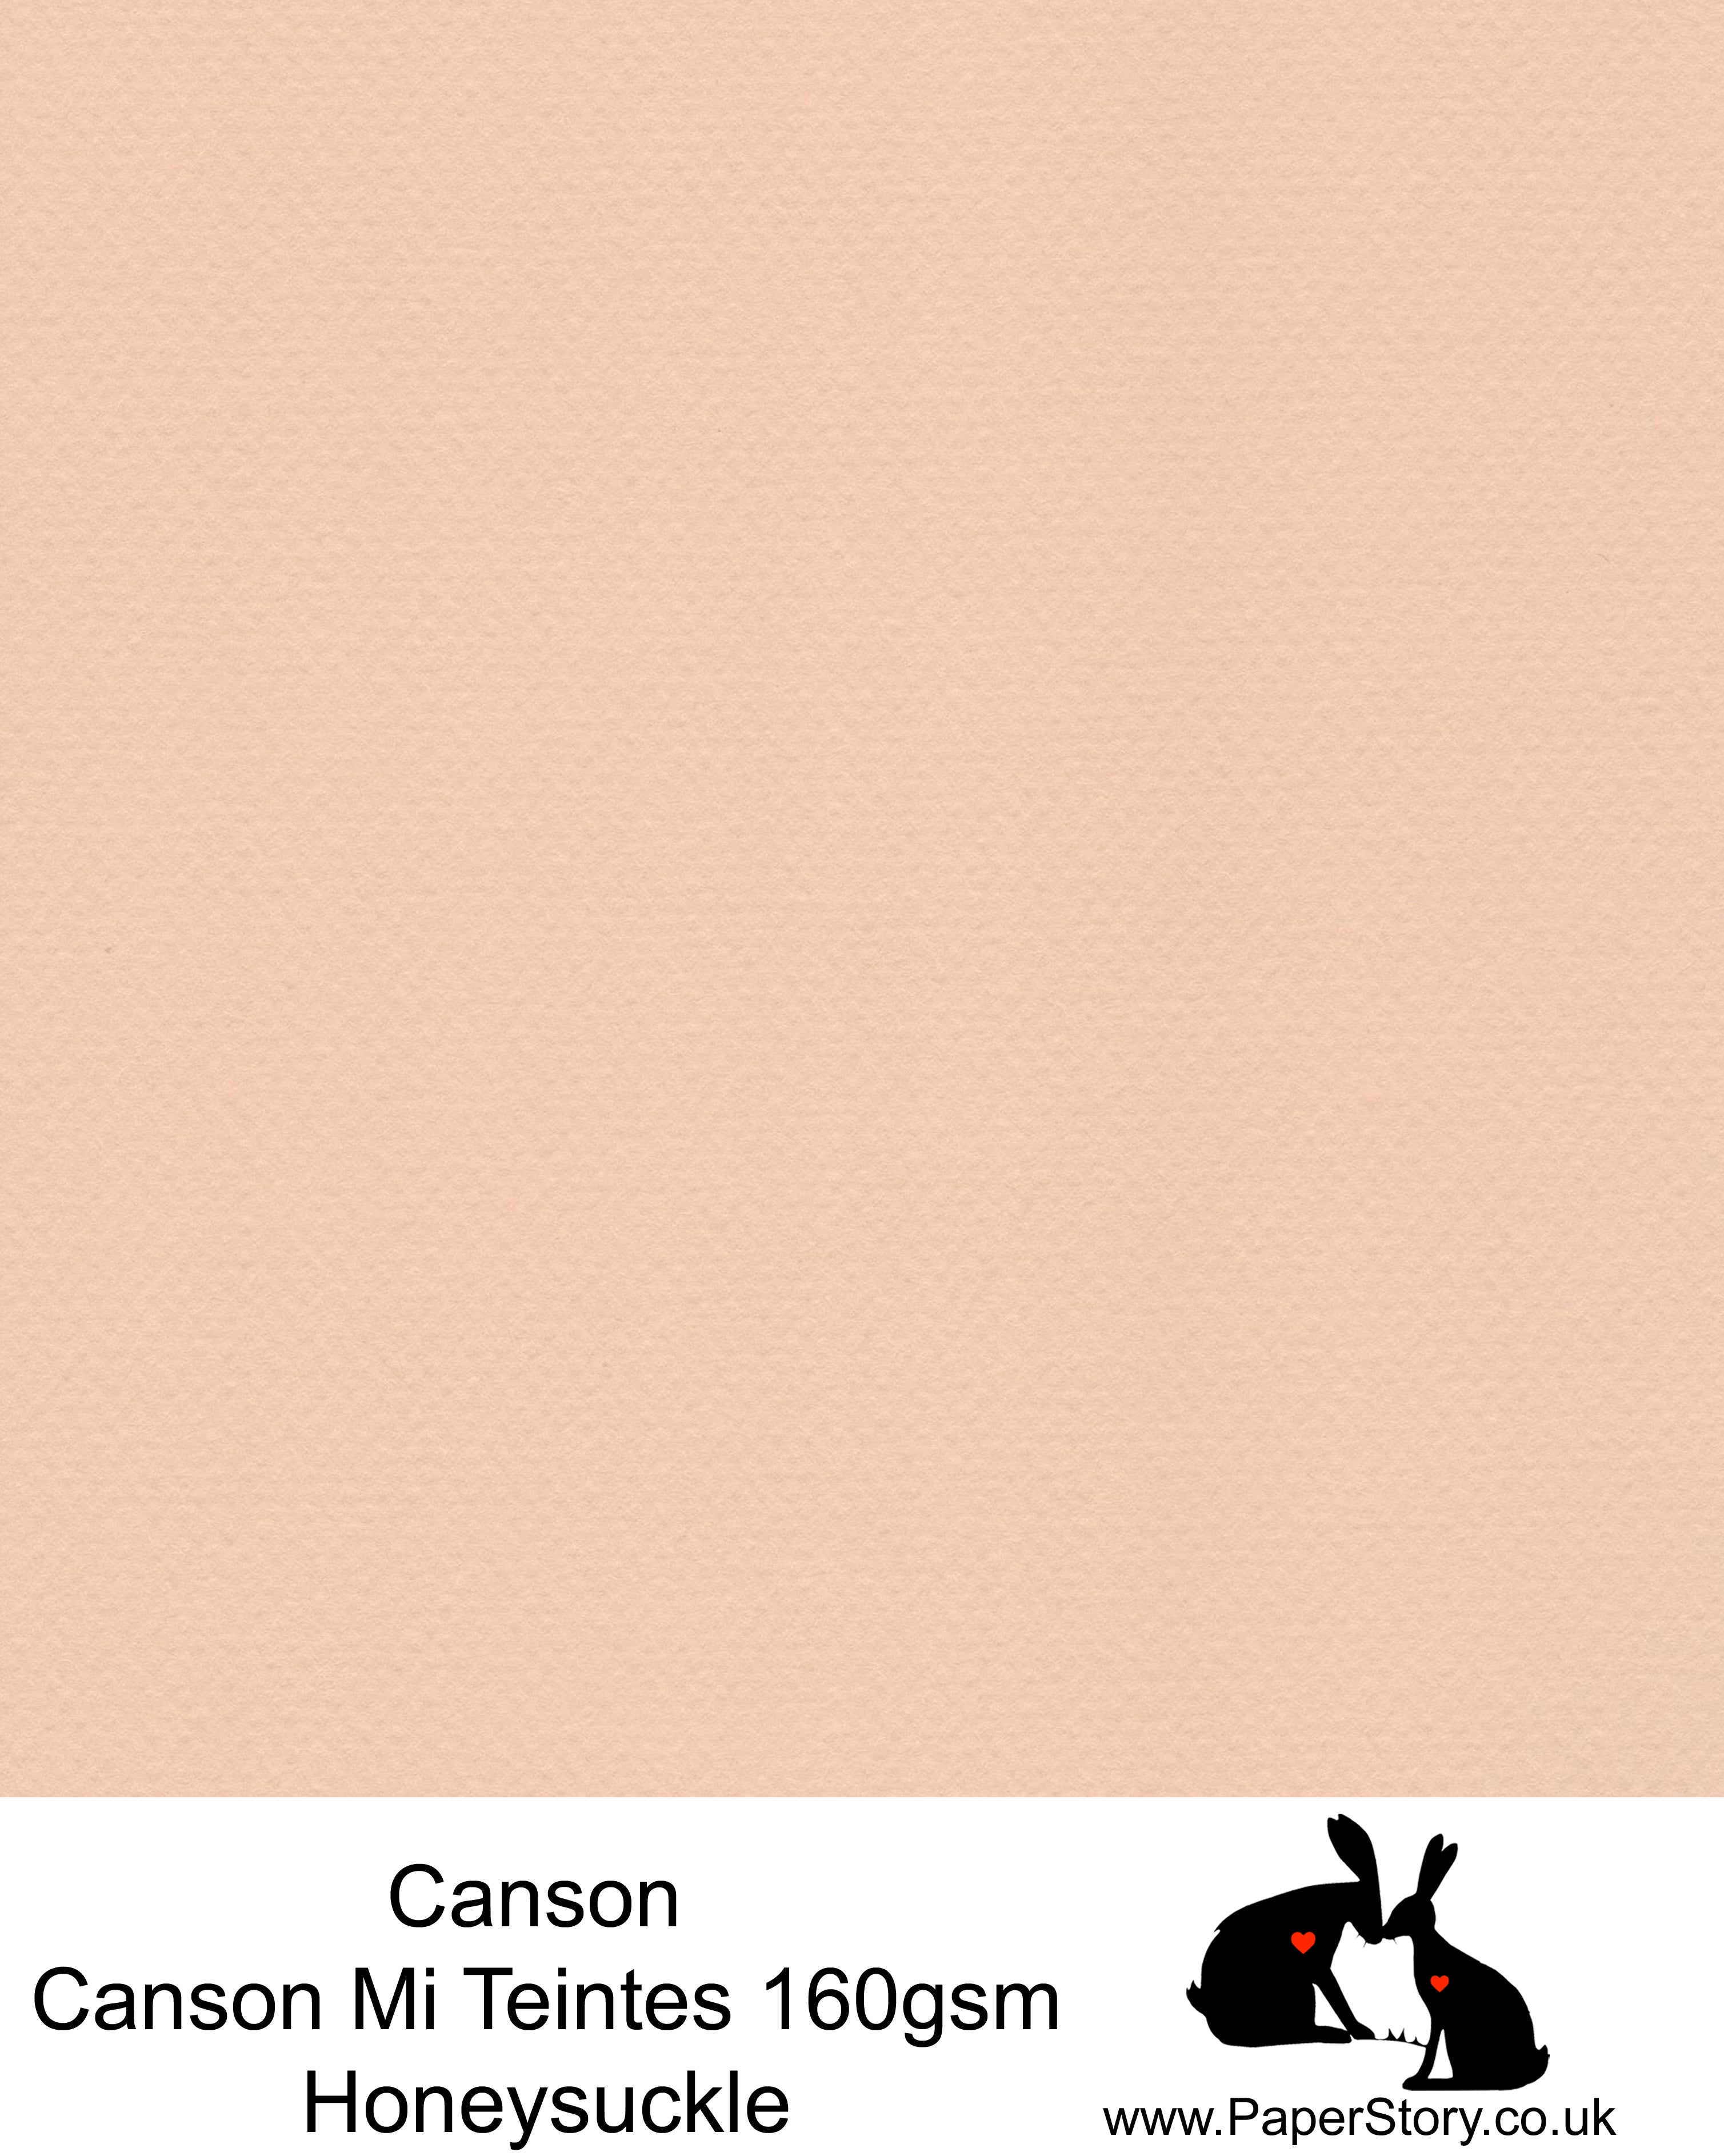 Canson Mi Teintes acid free, Honeysuckle warm pink, hammered texture honeycomb surface paper 160 gsm. This is a popular and classic paper for all artists especially well respected for Pastel  and Papercutting made famous by Paper Panda. This paper has a honeycombed finish one side and fine grain the other. An authentic art paper, acid free with a  very high 50% cotton content. Canson Mi-Teintes complies with the ISO 9706 standard on permanence, a guarantee of excellent conservation  